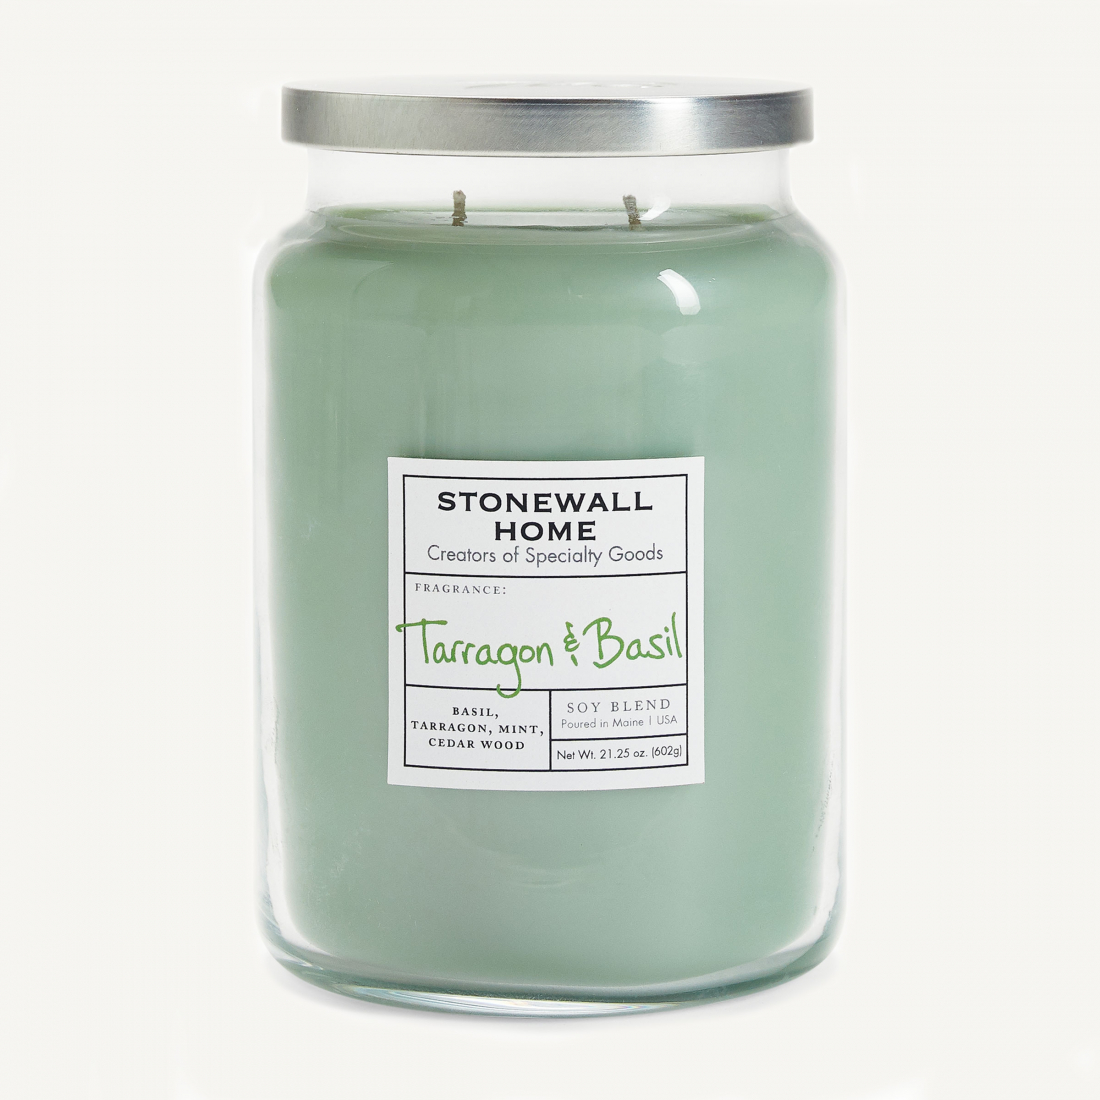 'Tarragon & Basil' Scented Candle - 602 g